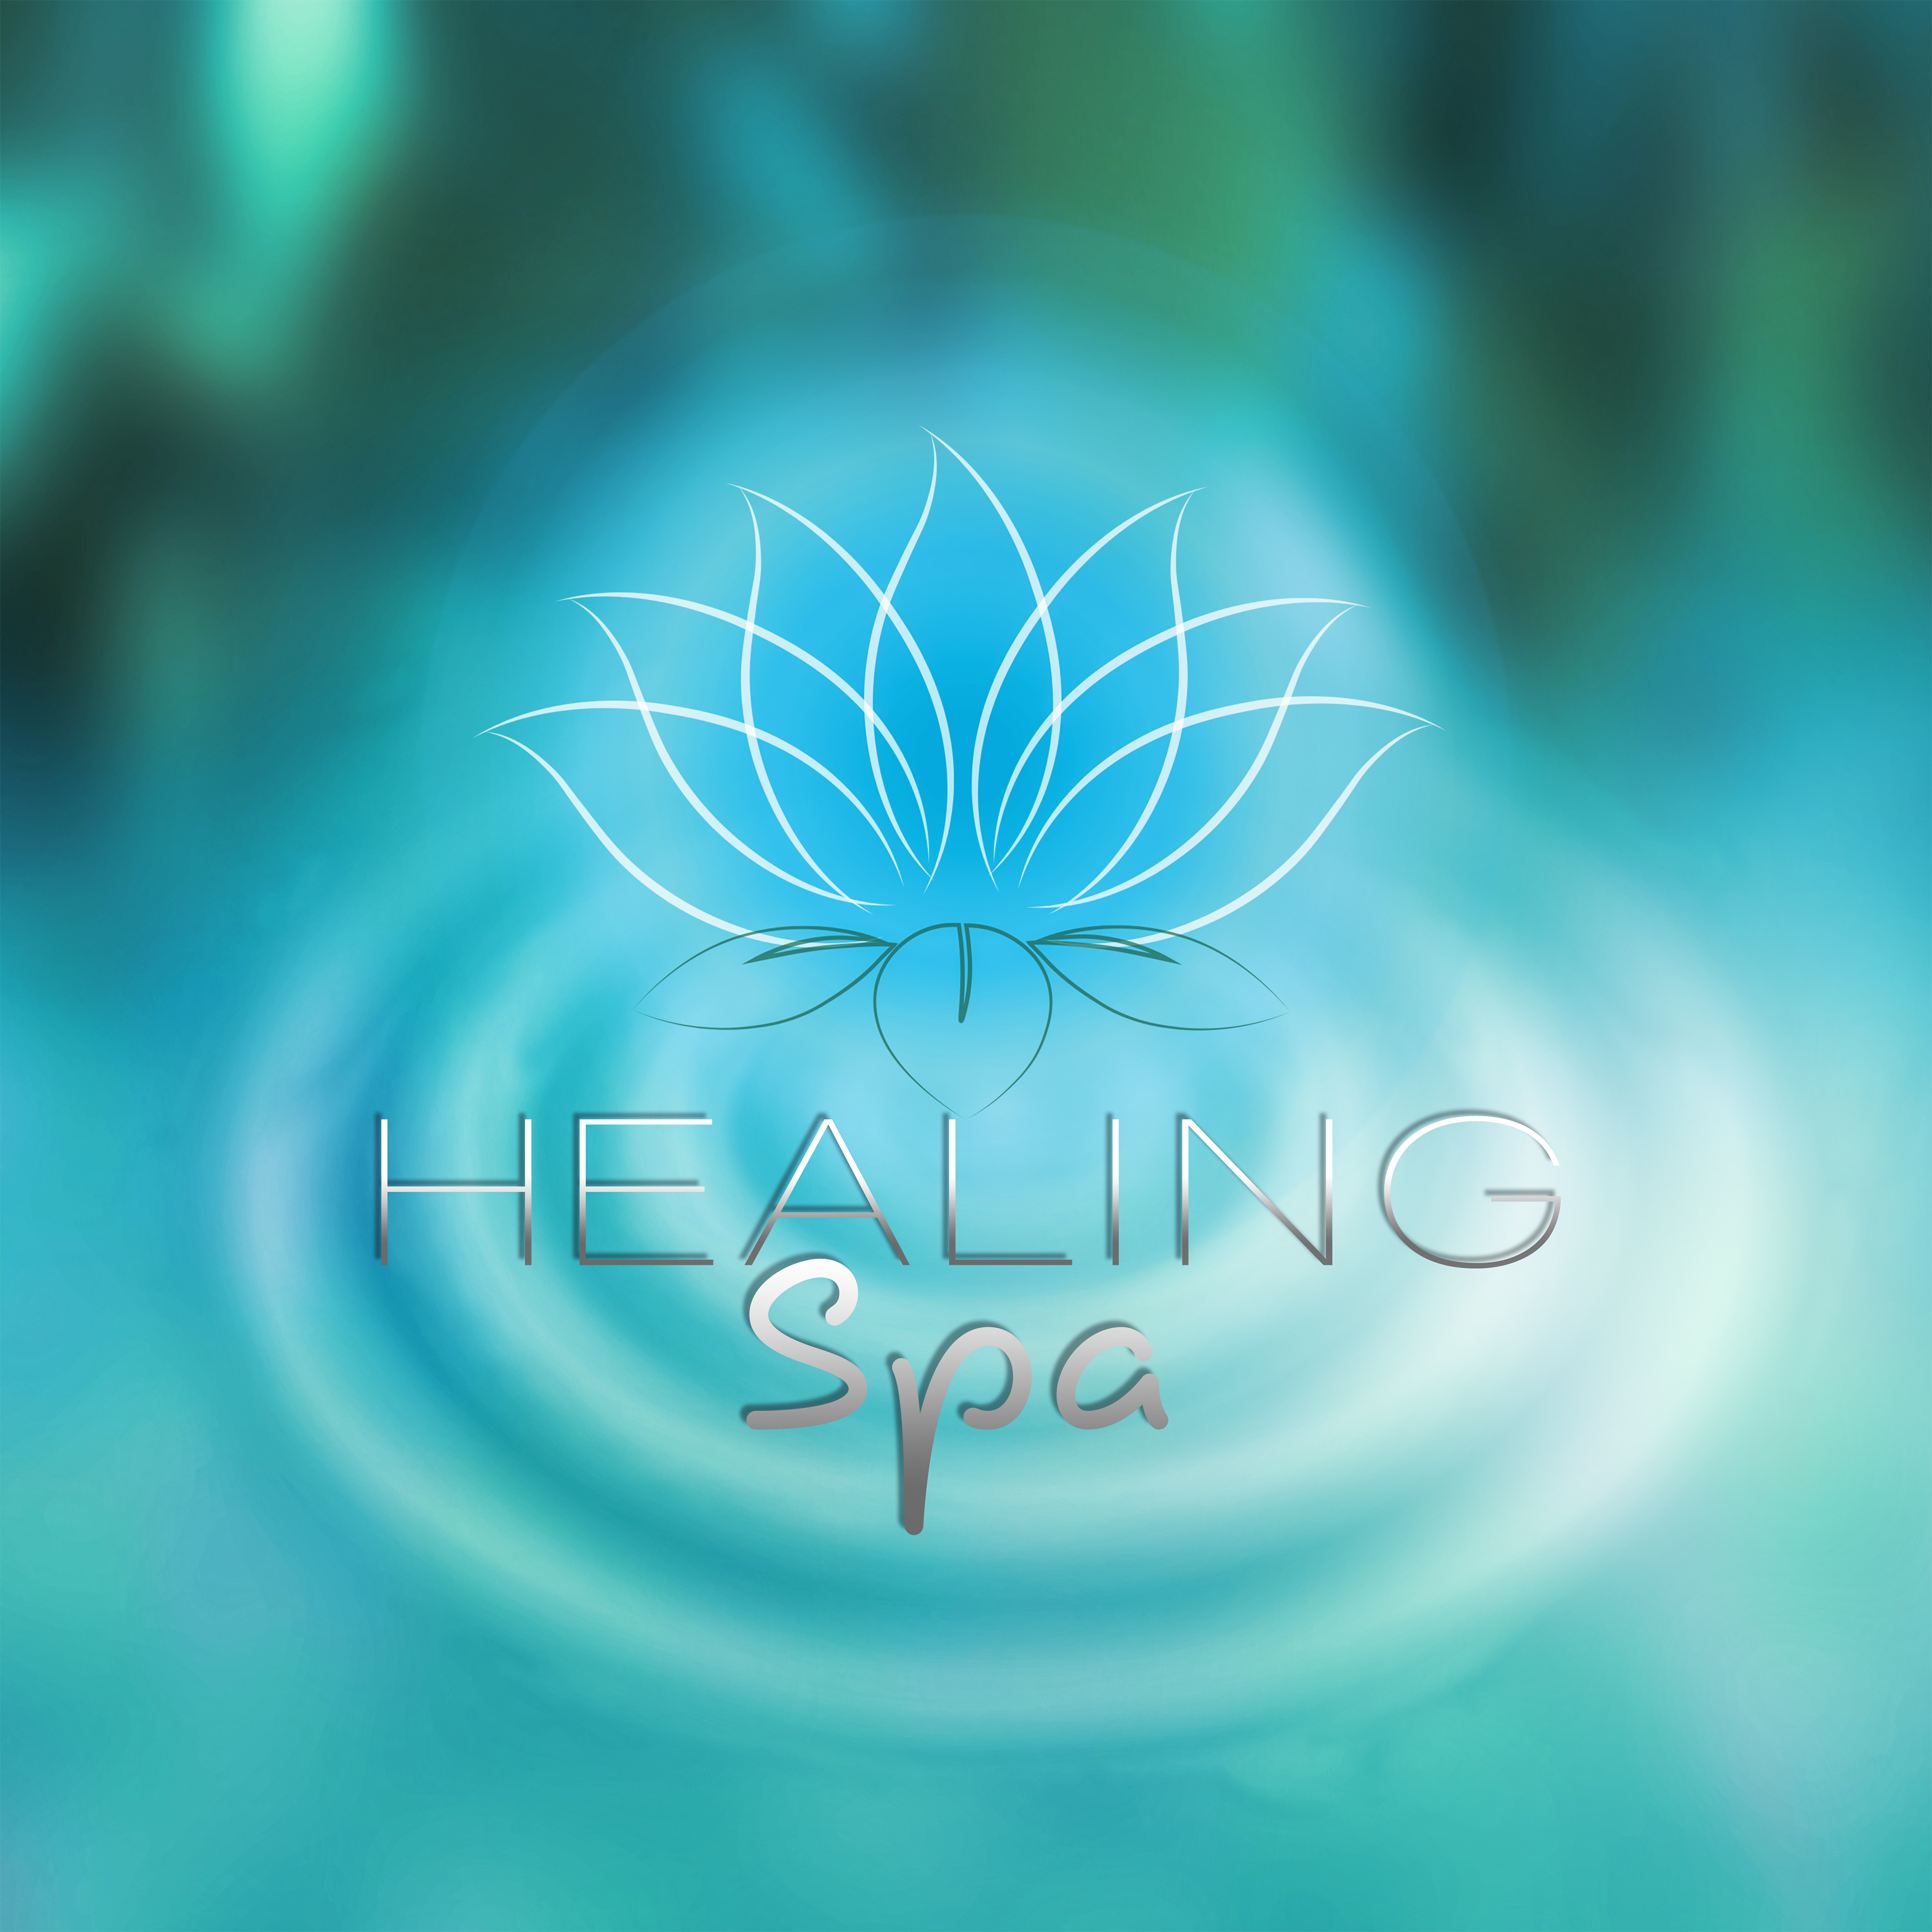 Healing Spa  Perfect Relaxation, Massage Music, Spa  Wellness, Soothing Sounds to Calm Down, Zen Music